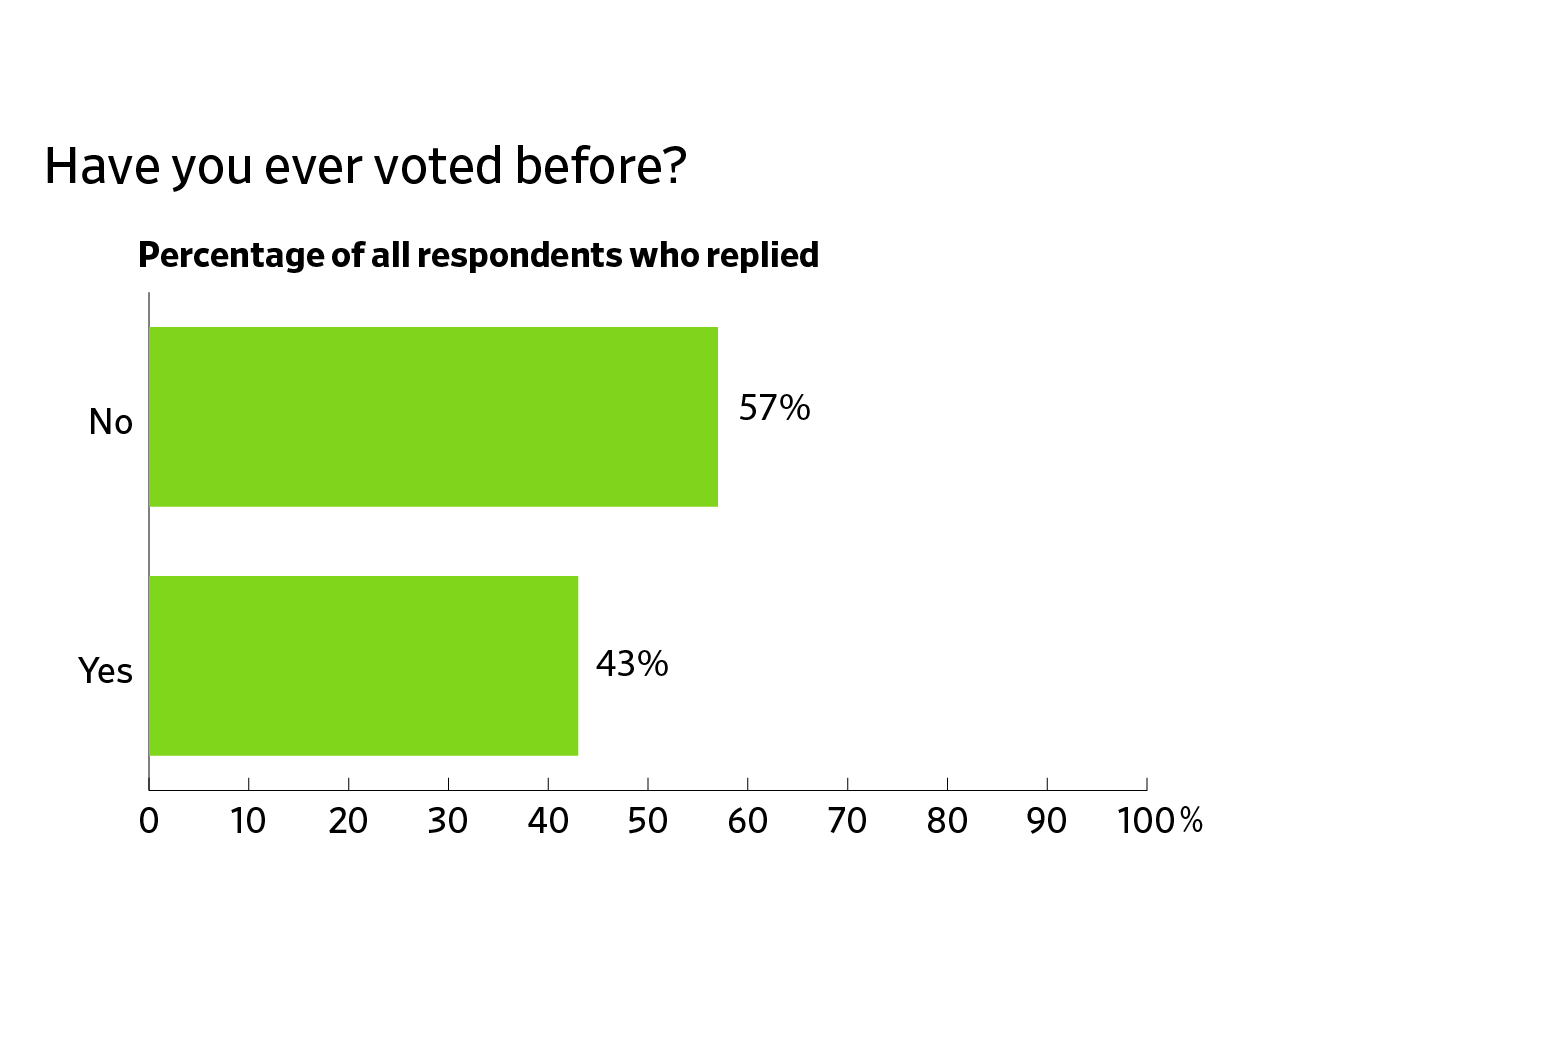 Have you ever voted before? 57% no, 43% yes.